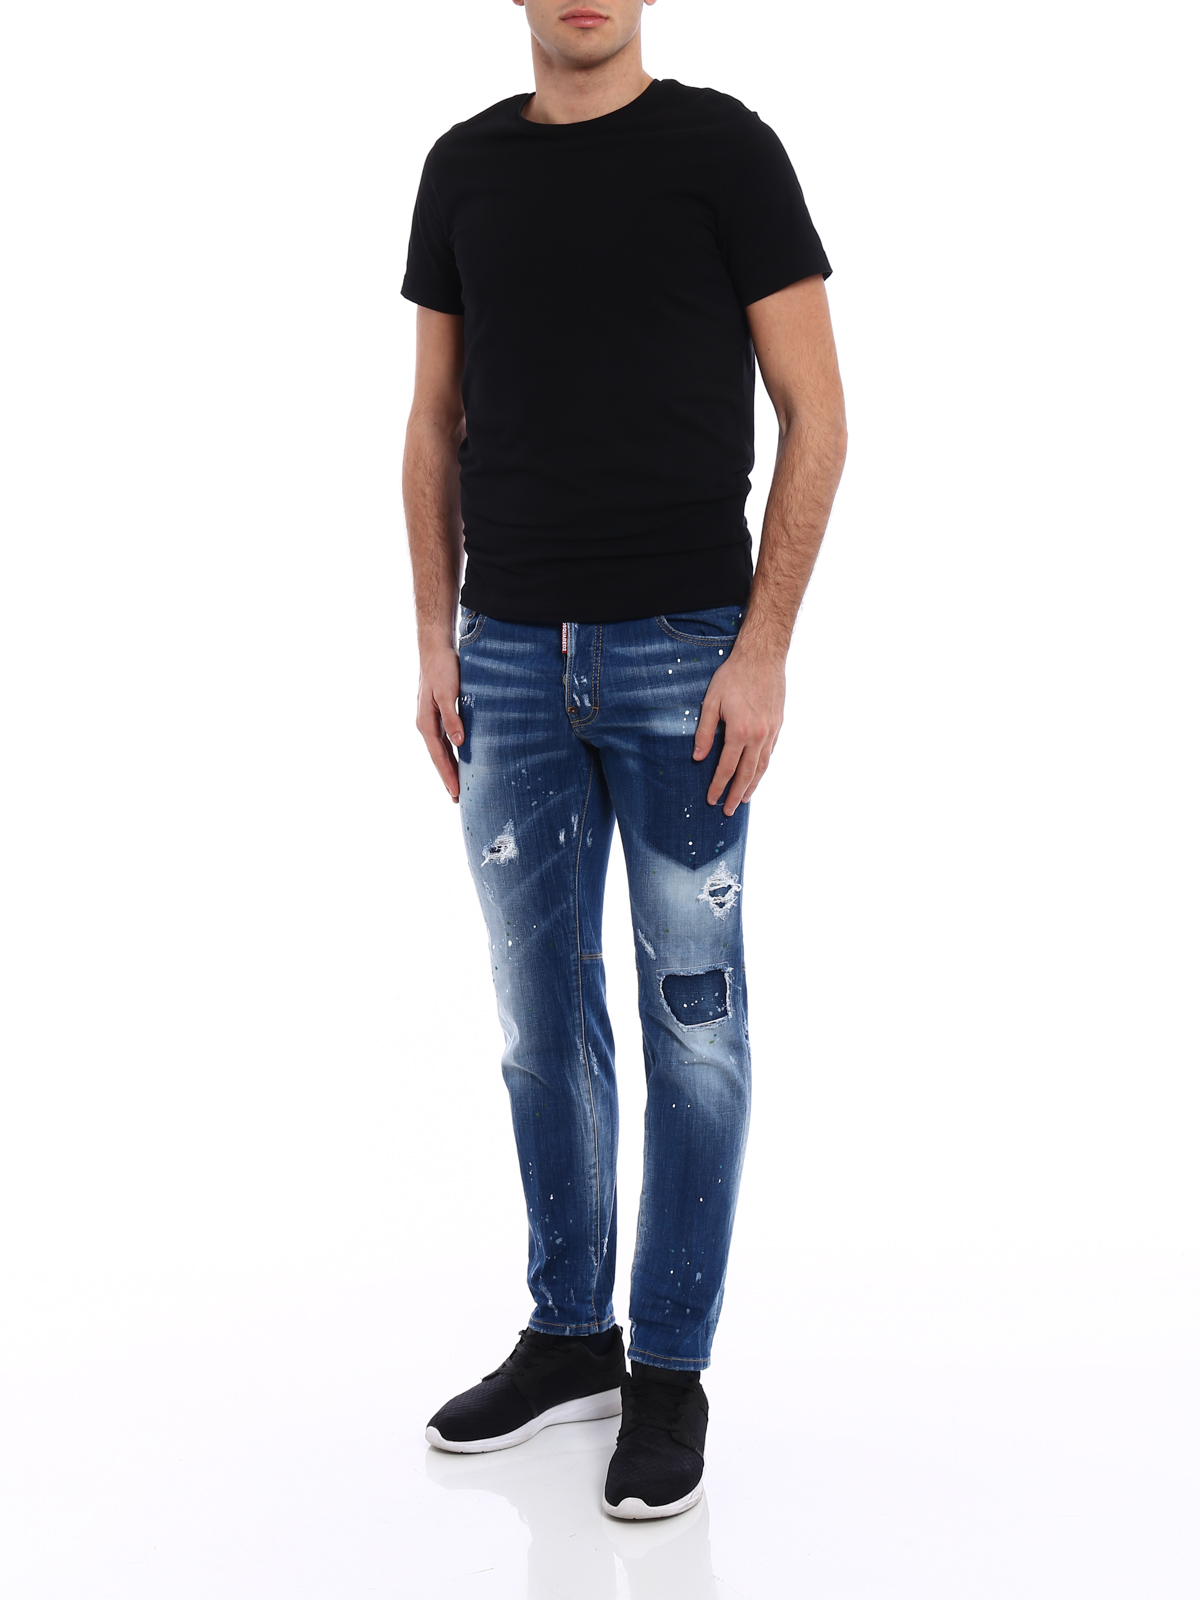 spotted jeans - straight leg jeans 